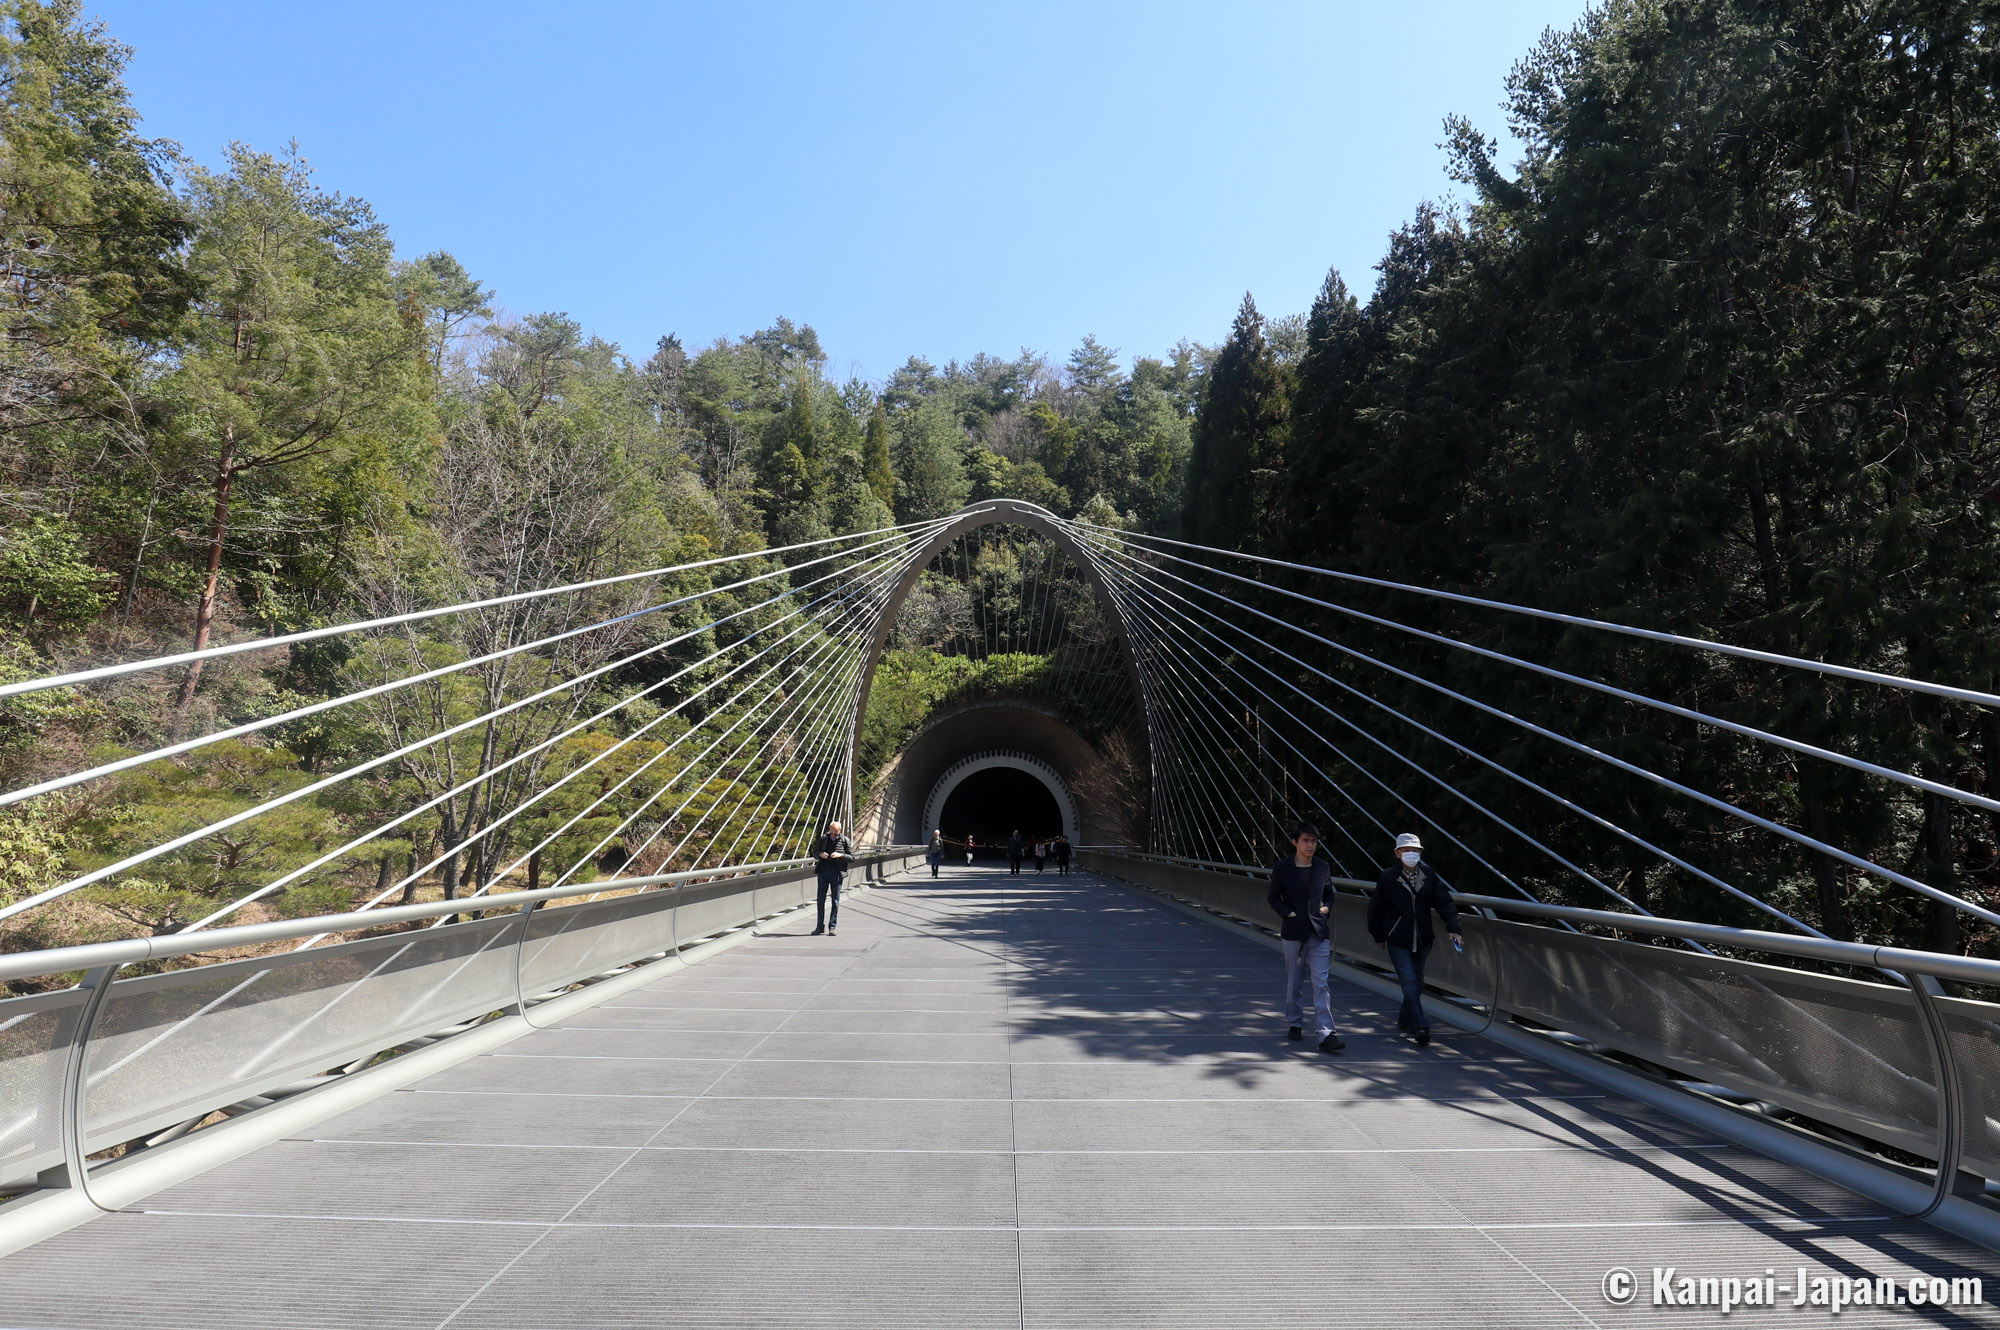 Miho Museum Tunnel, Visitor Tunnel leading to the Miho Muse…